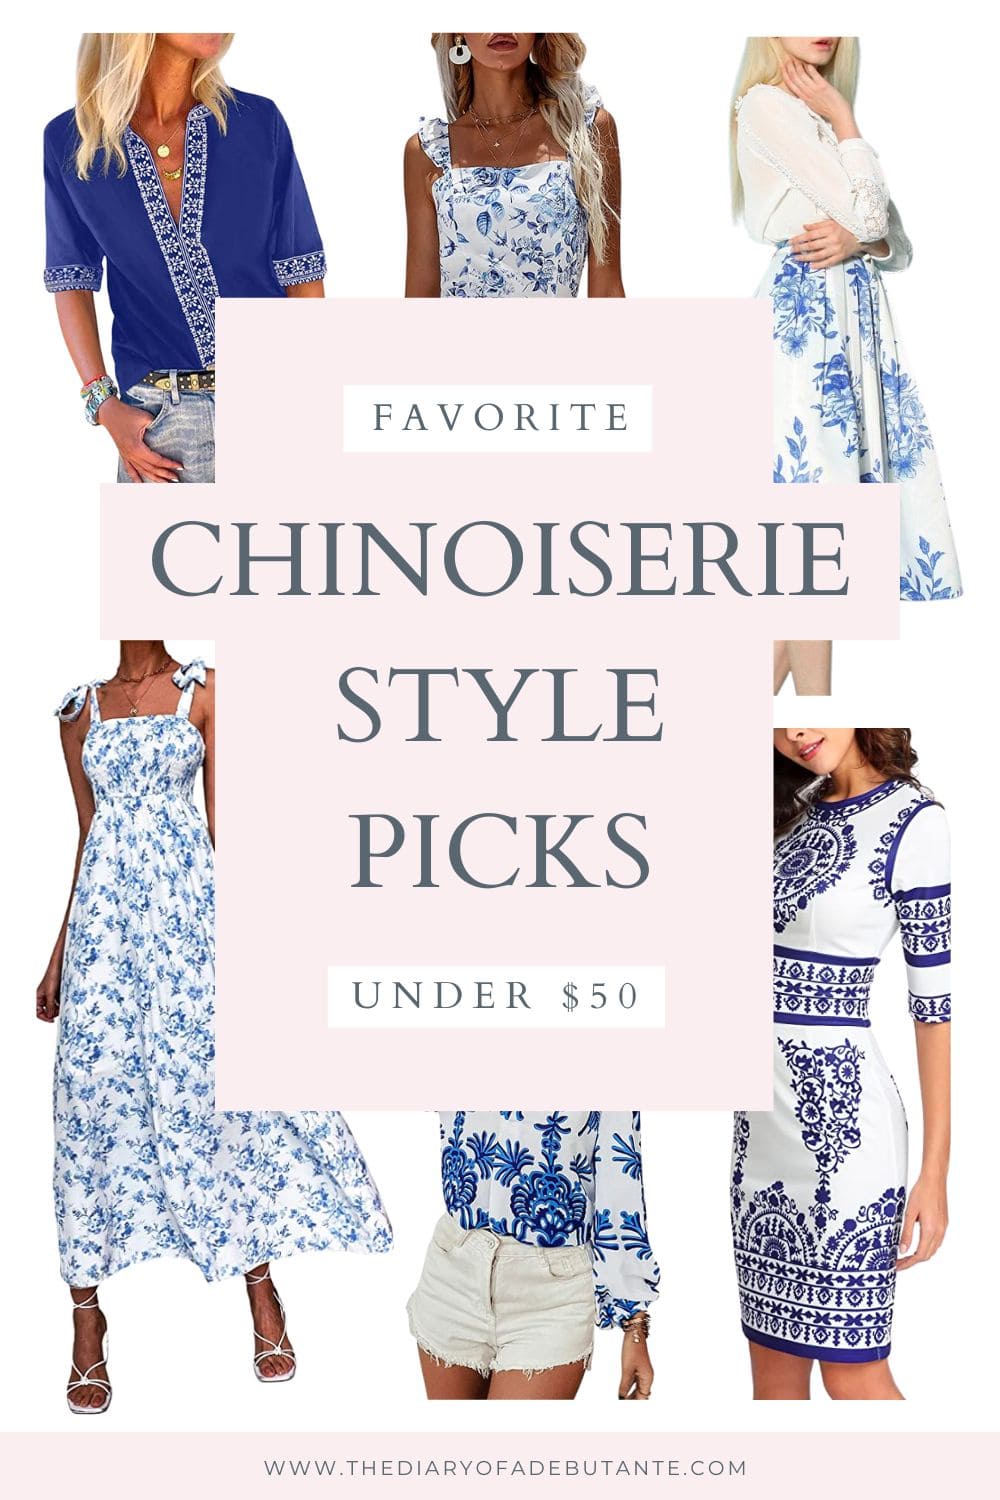 Affordable fashion blogger Stephanie Ziajka shares 9 Chinoiserie-inspired blue and white outfit ideas on Diary of a Debutante